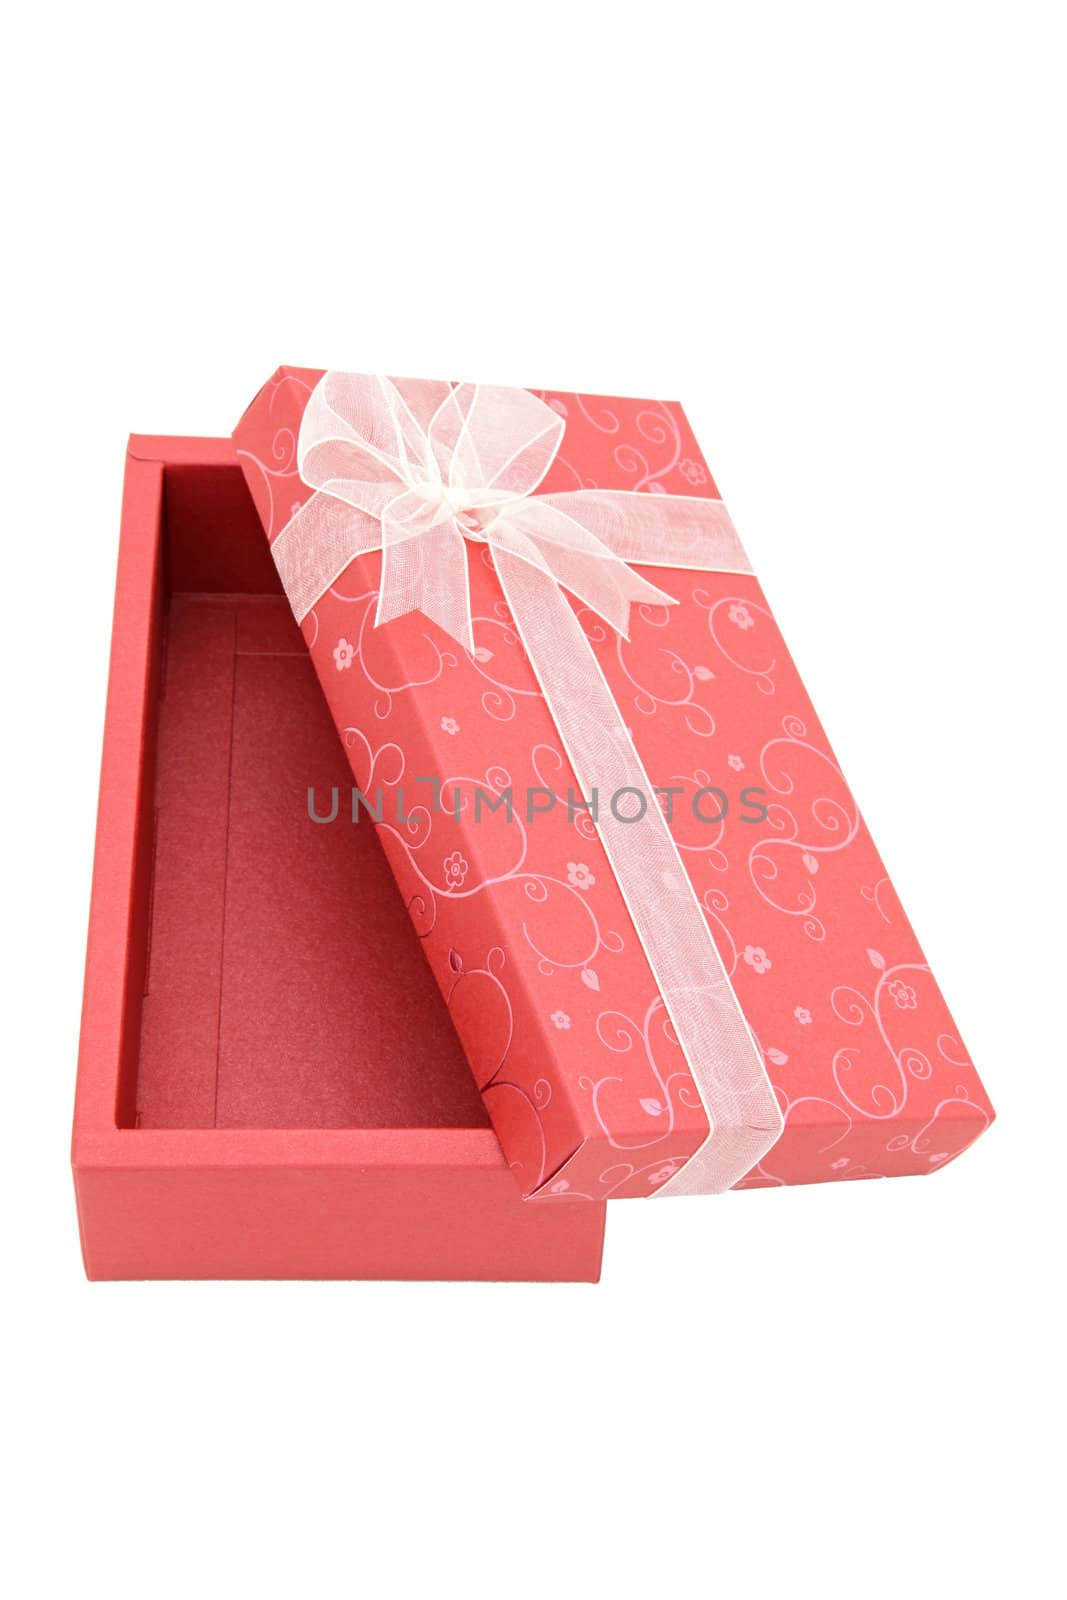 perspective of isolated open red holiday gift box, vertical by vichie81